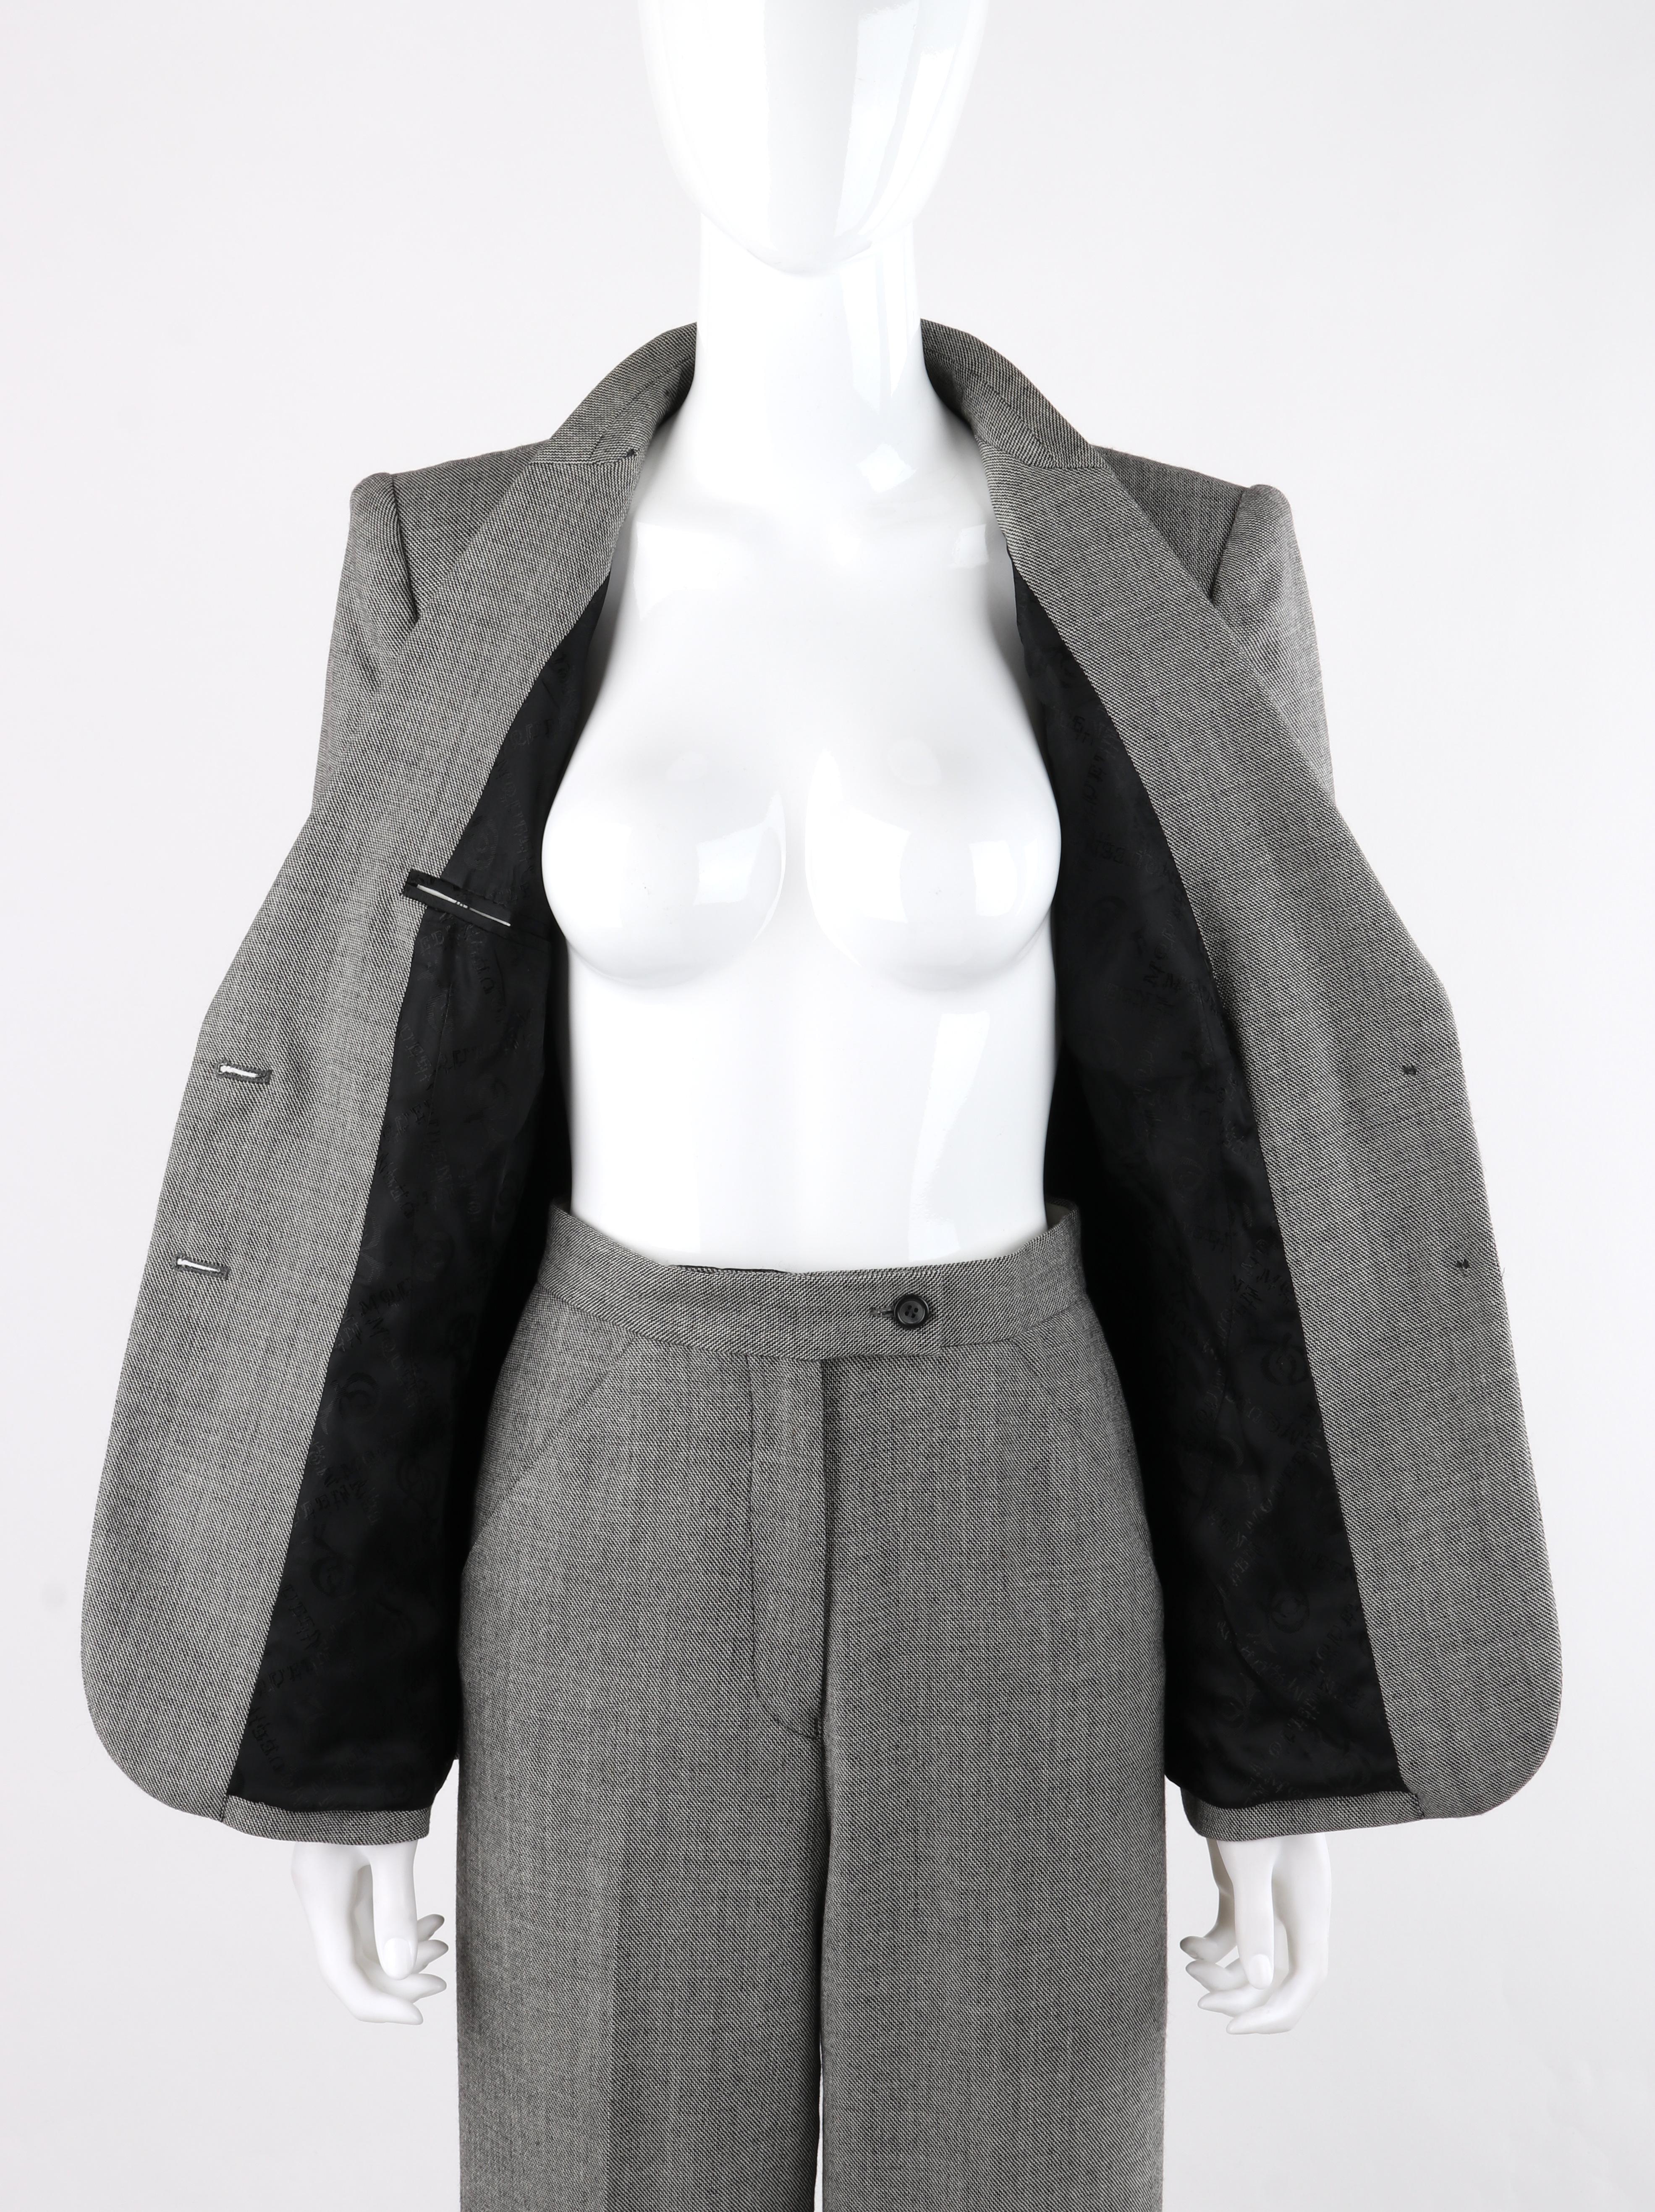 ALEXANDER McQUEEN A/W 1998 “Joan” Gray Blazer Jacket Wide Leg Trouser Pant Suit In Good Condition For Sale In Thiensville, WI